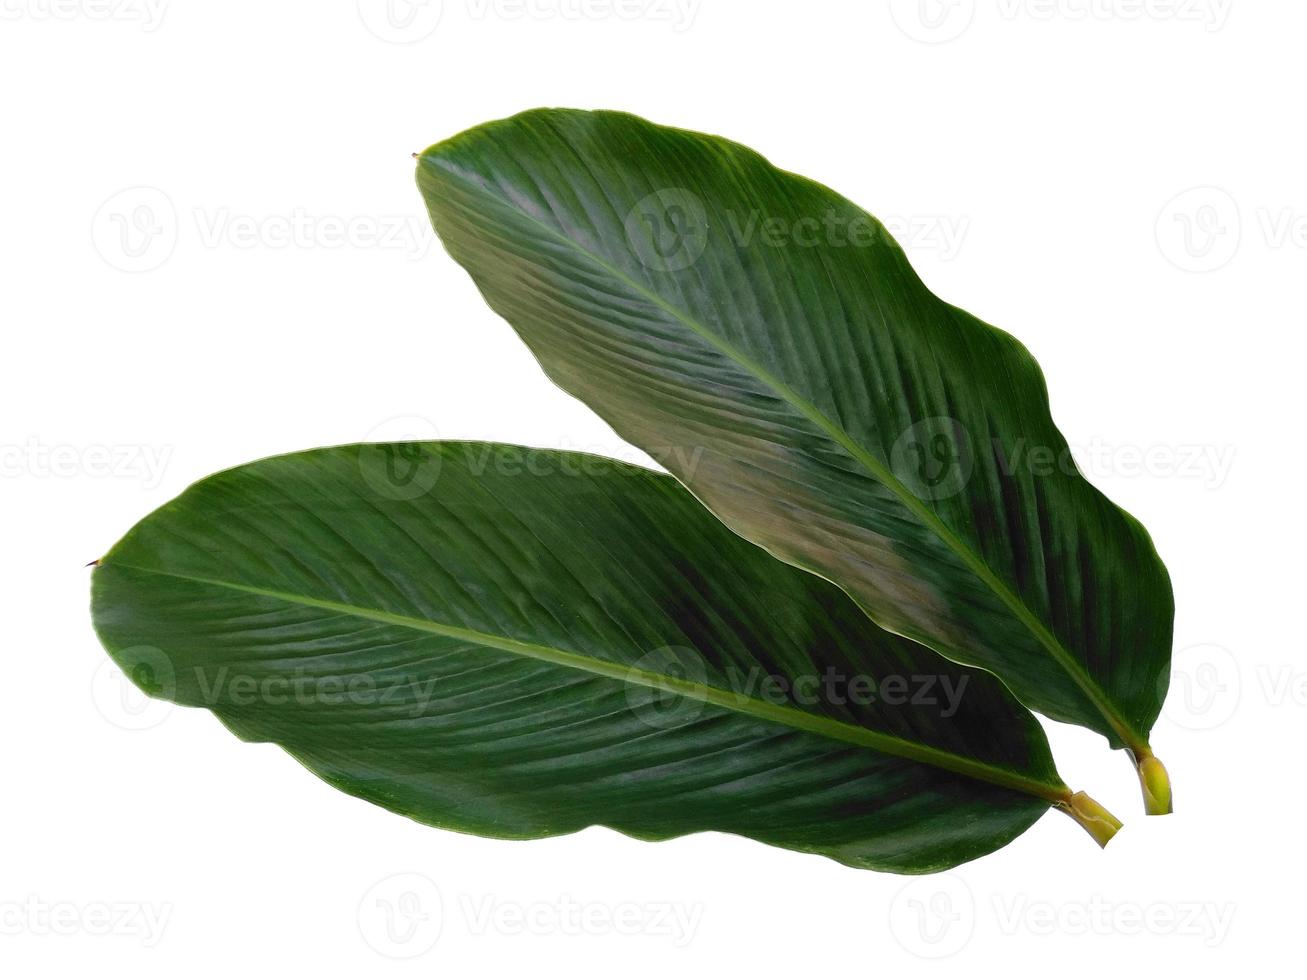 Red Ginger or Alpinia purpurata leaves isolated on white background photo